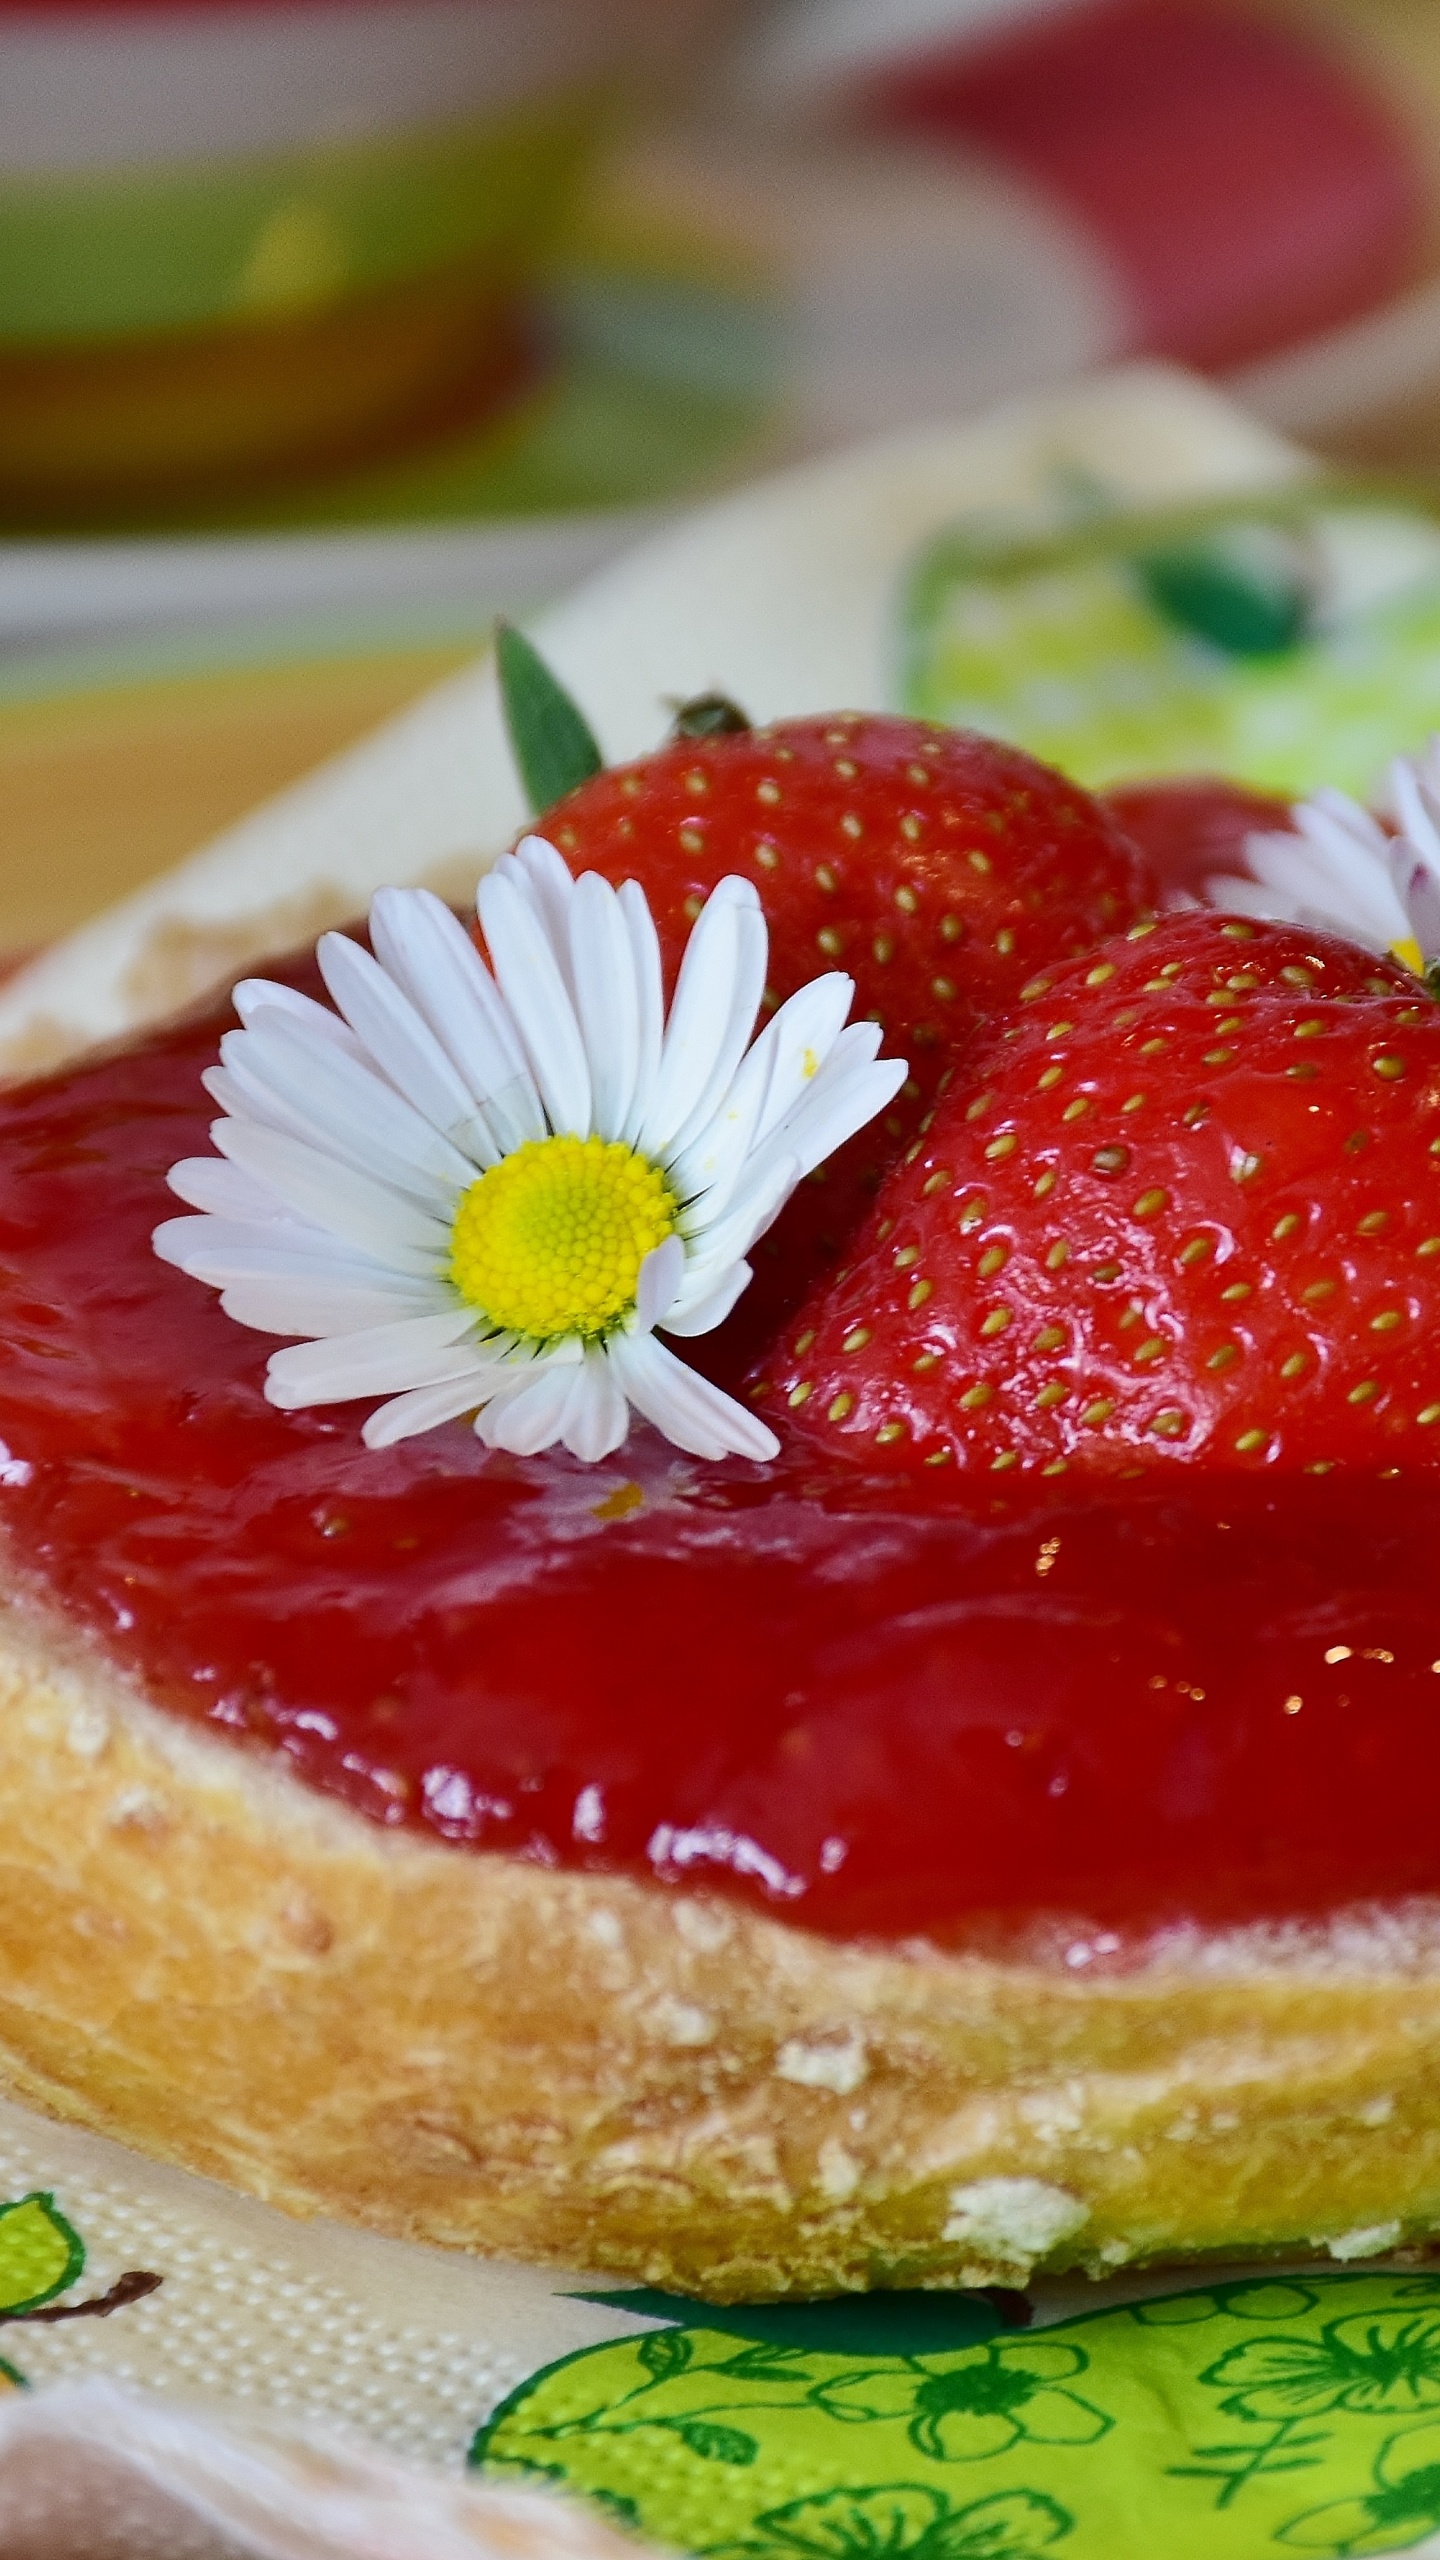 Strawberry on Bread With Cream on Top. Wallpaper in 1440x2560 Resolution